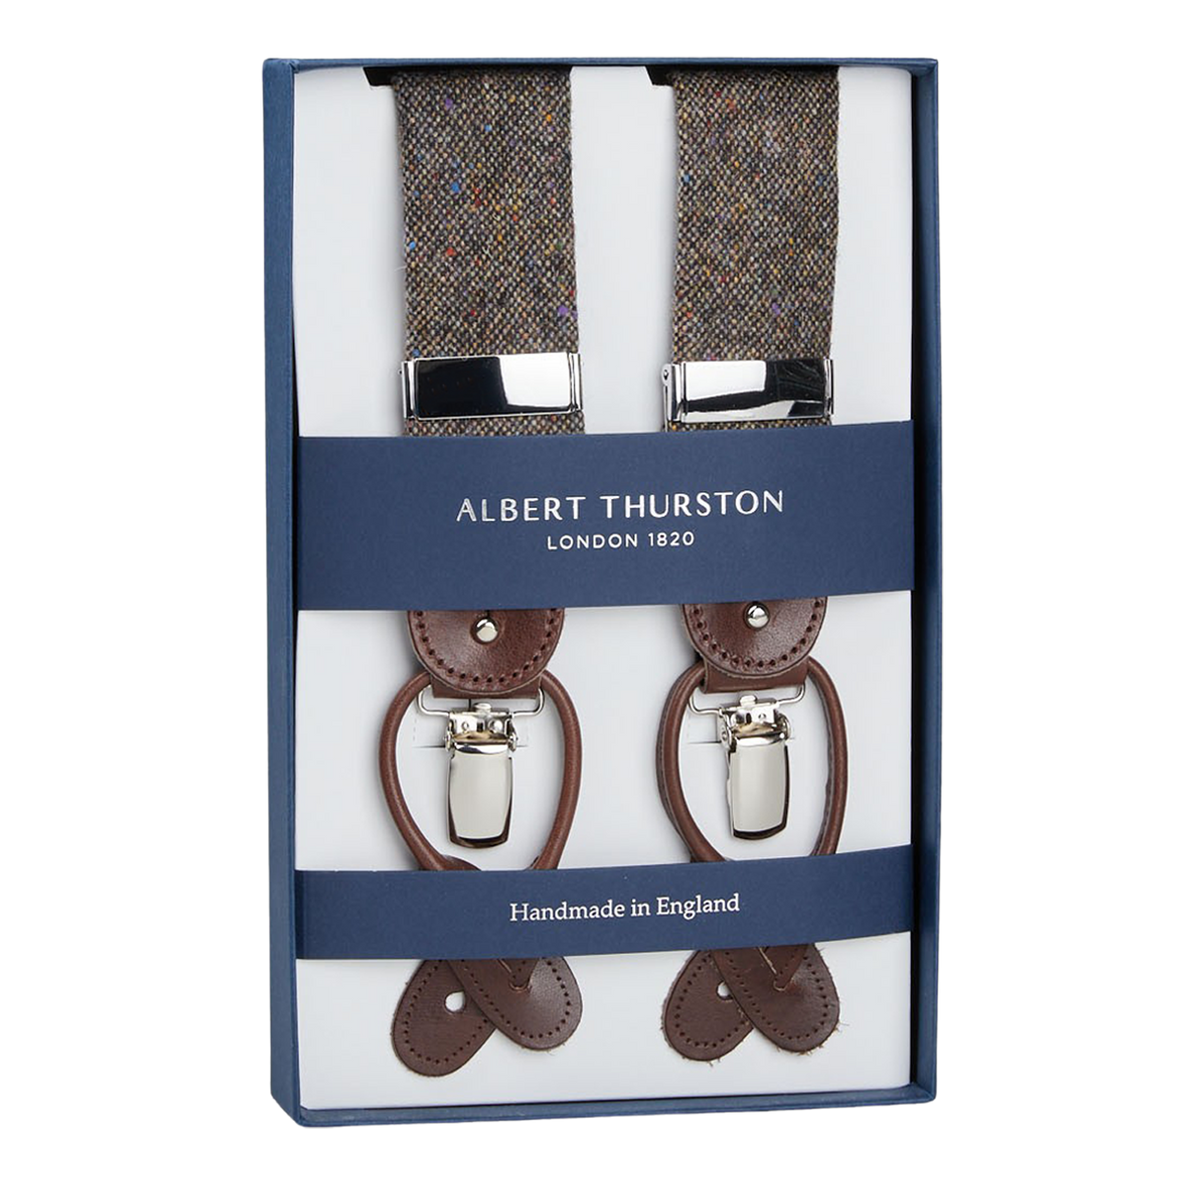 Albert Thurston is renowned for their exceptional craftsmanship in handmade braces. These Brown Donegal Tweed 35mm Braces from Albert Thurston are a true testament to their expertise. Elevate your style and keep your trousers secure.